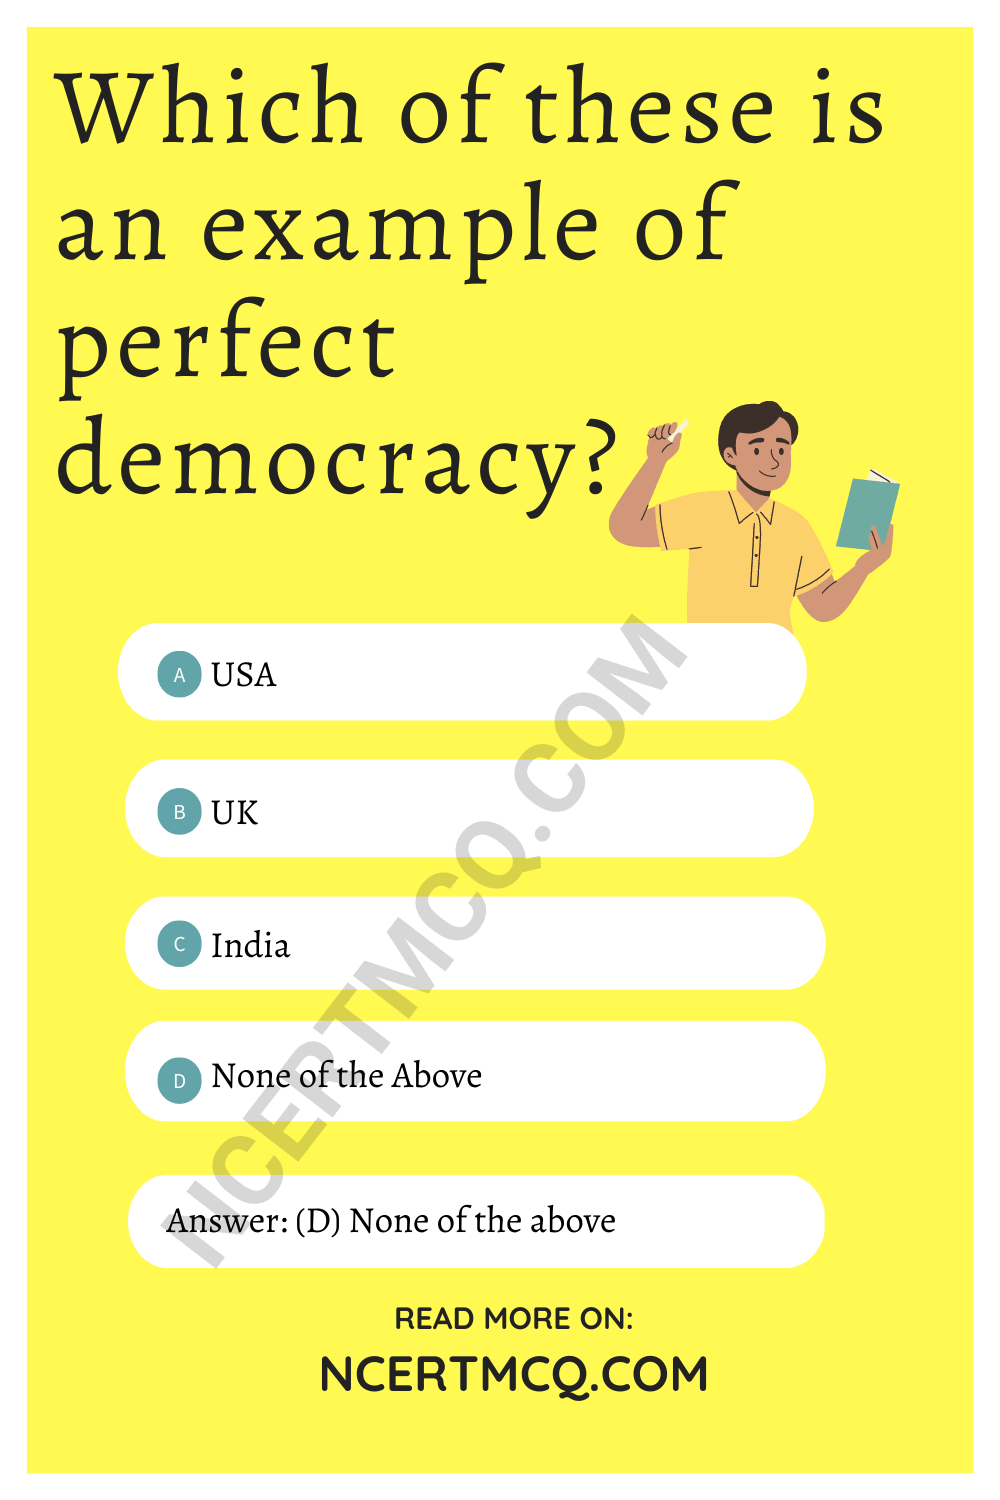 Which of these is an example of perfect democracy?